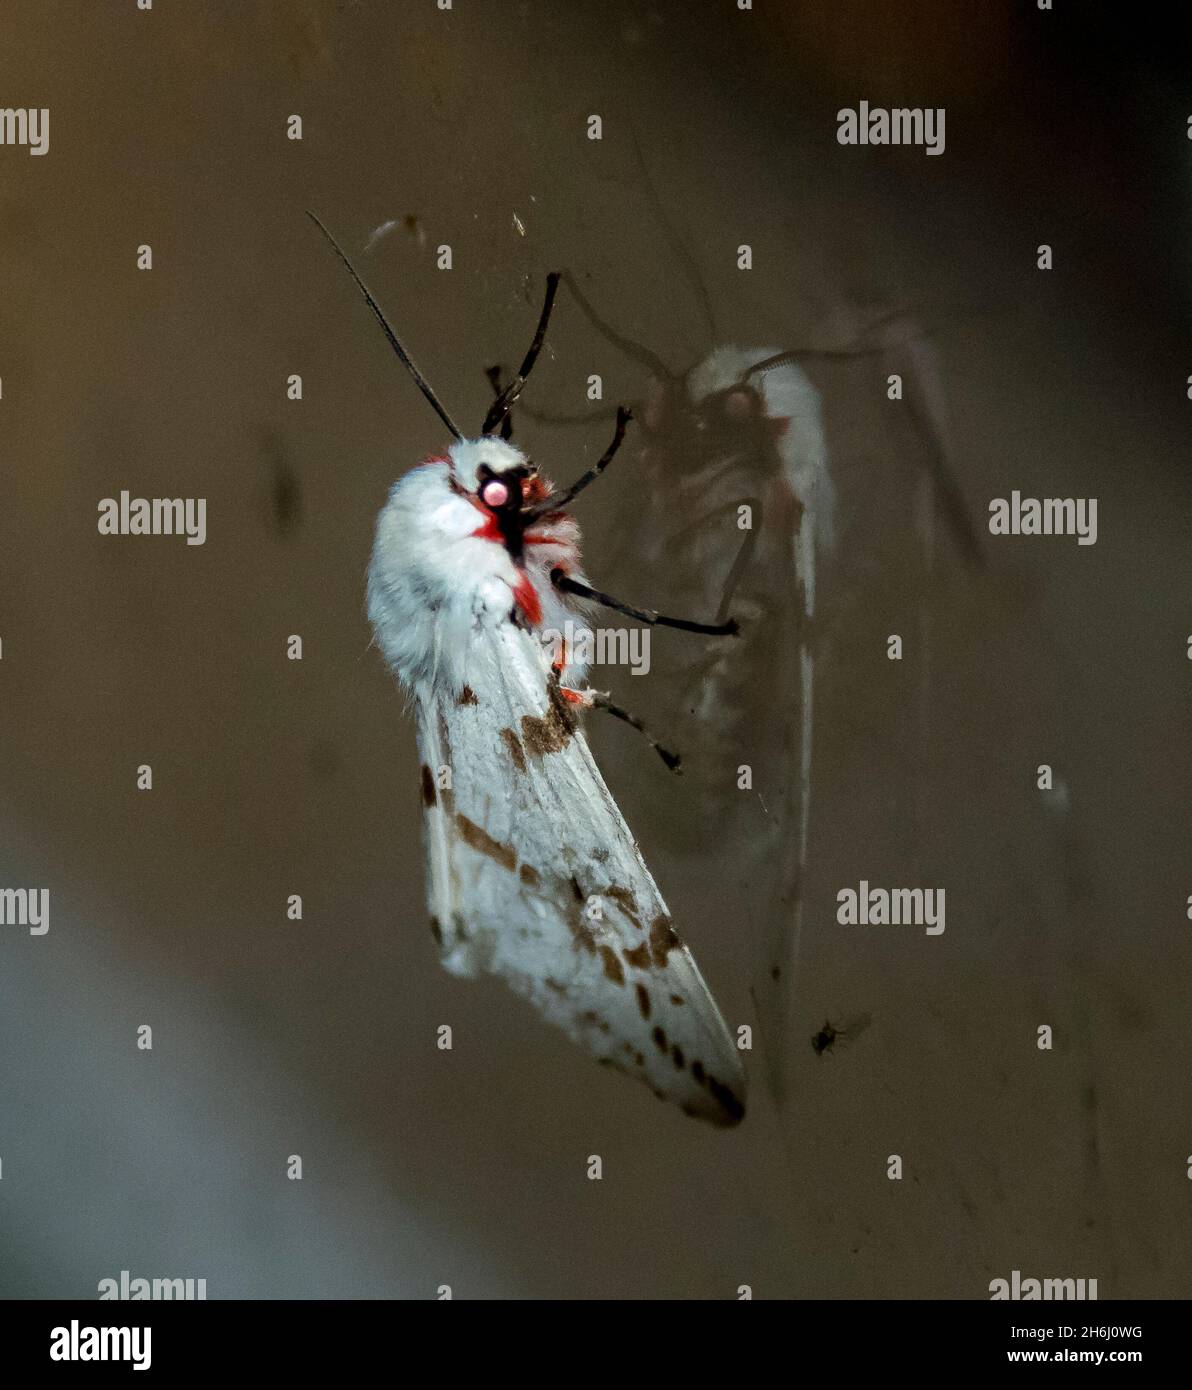 Australian Light Ermine or Dark-spotted Tiger Moth (Spilosoma canescens) on window. White and furry with brown and red markings. Queensland, spring. Stock Photo